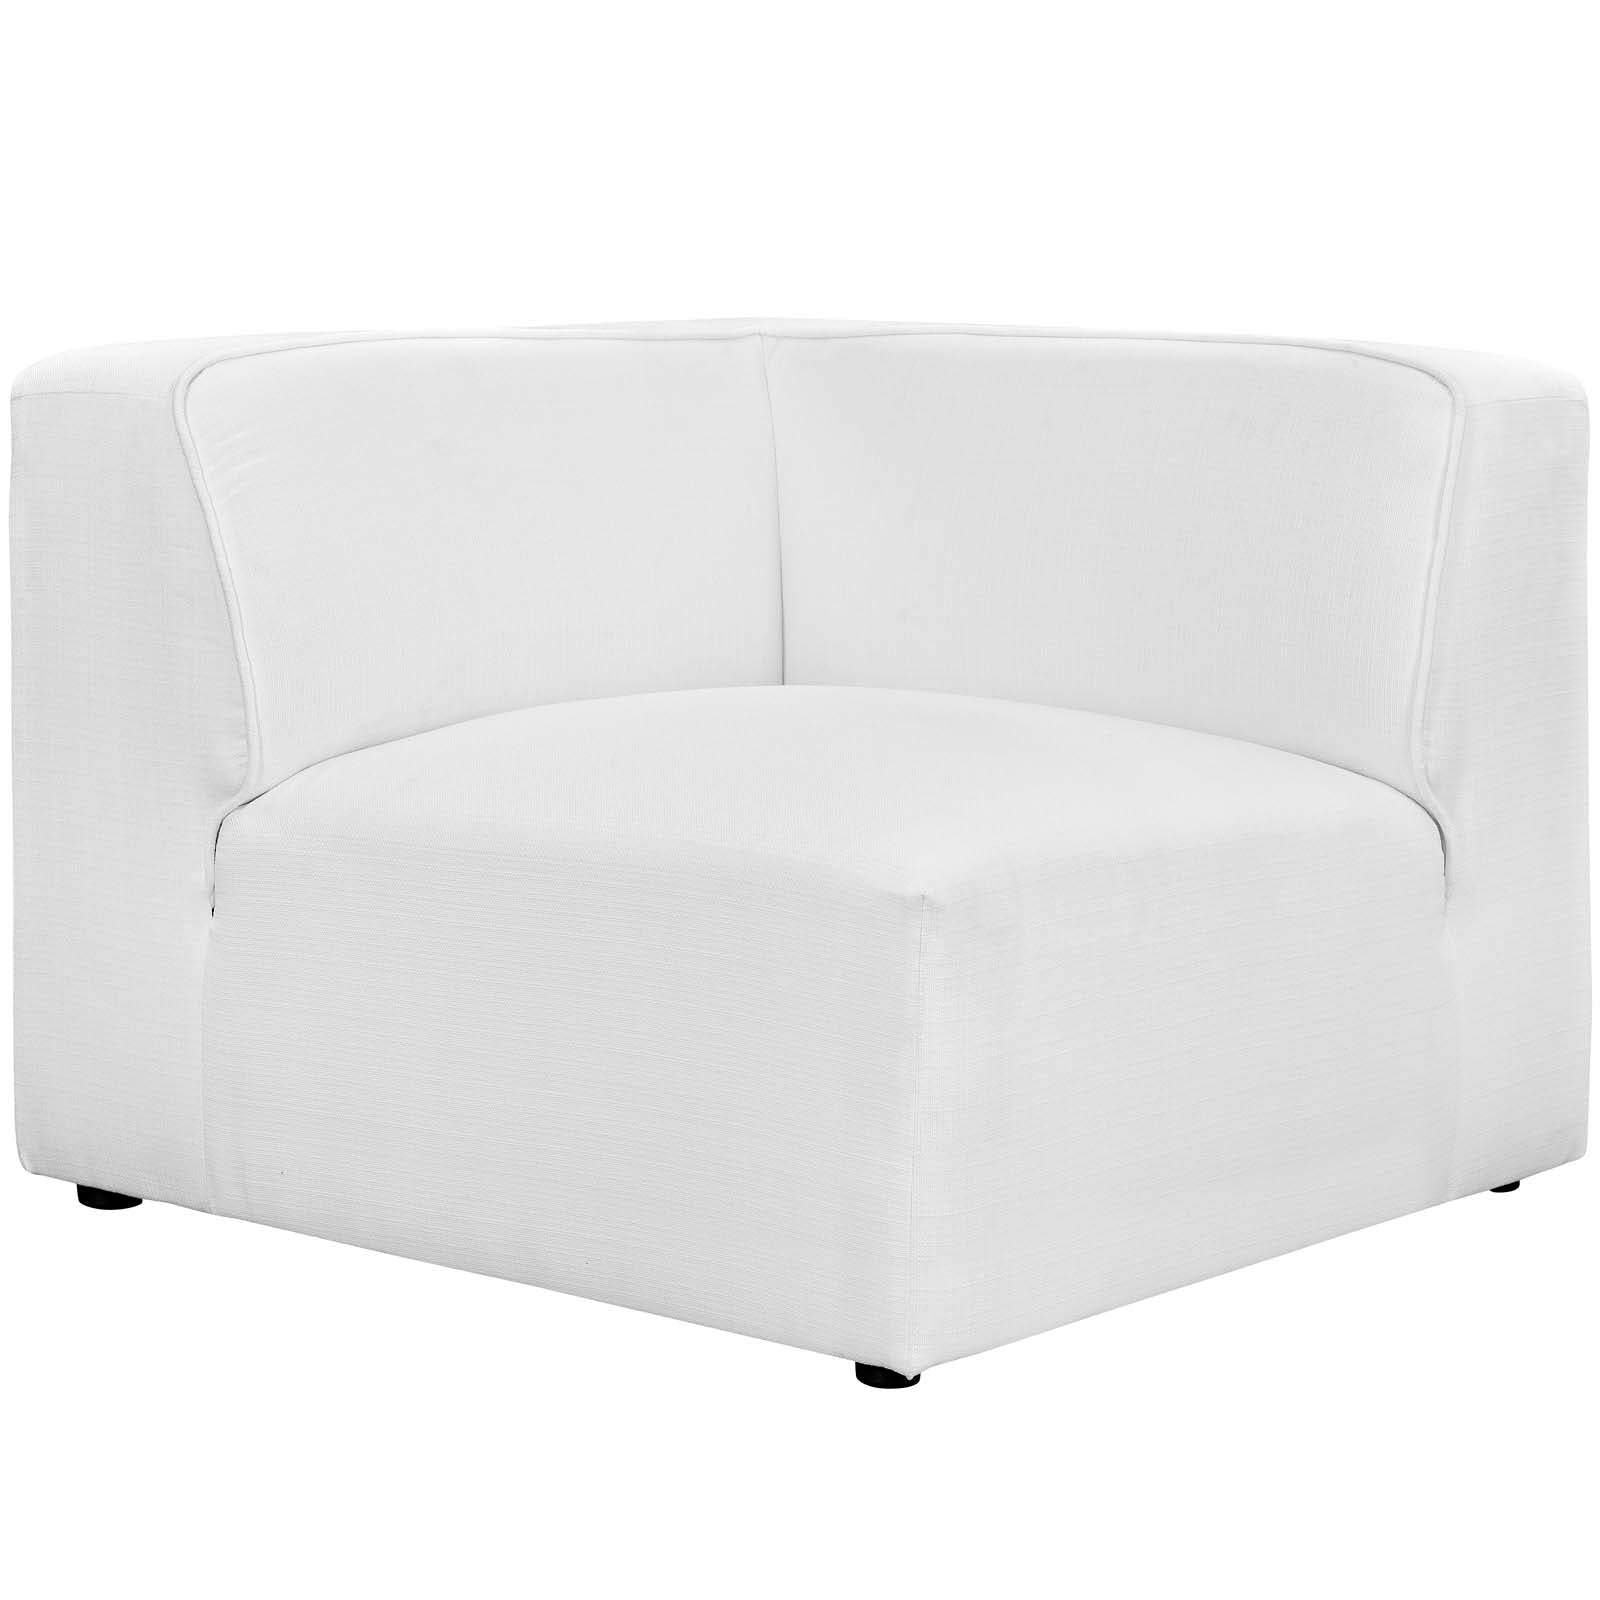 Modway Sectional Sofas - Mingle 7 Piece Upholstered Fabric Sectional Sofa Set White